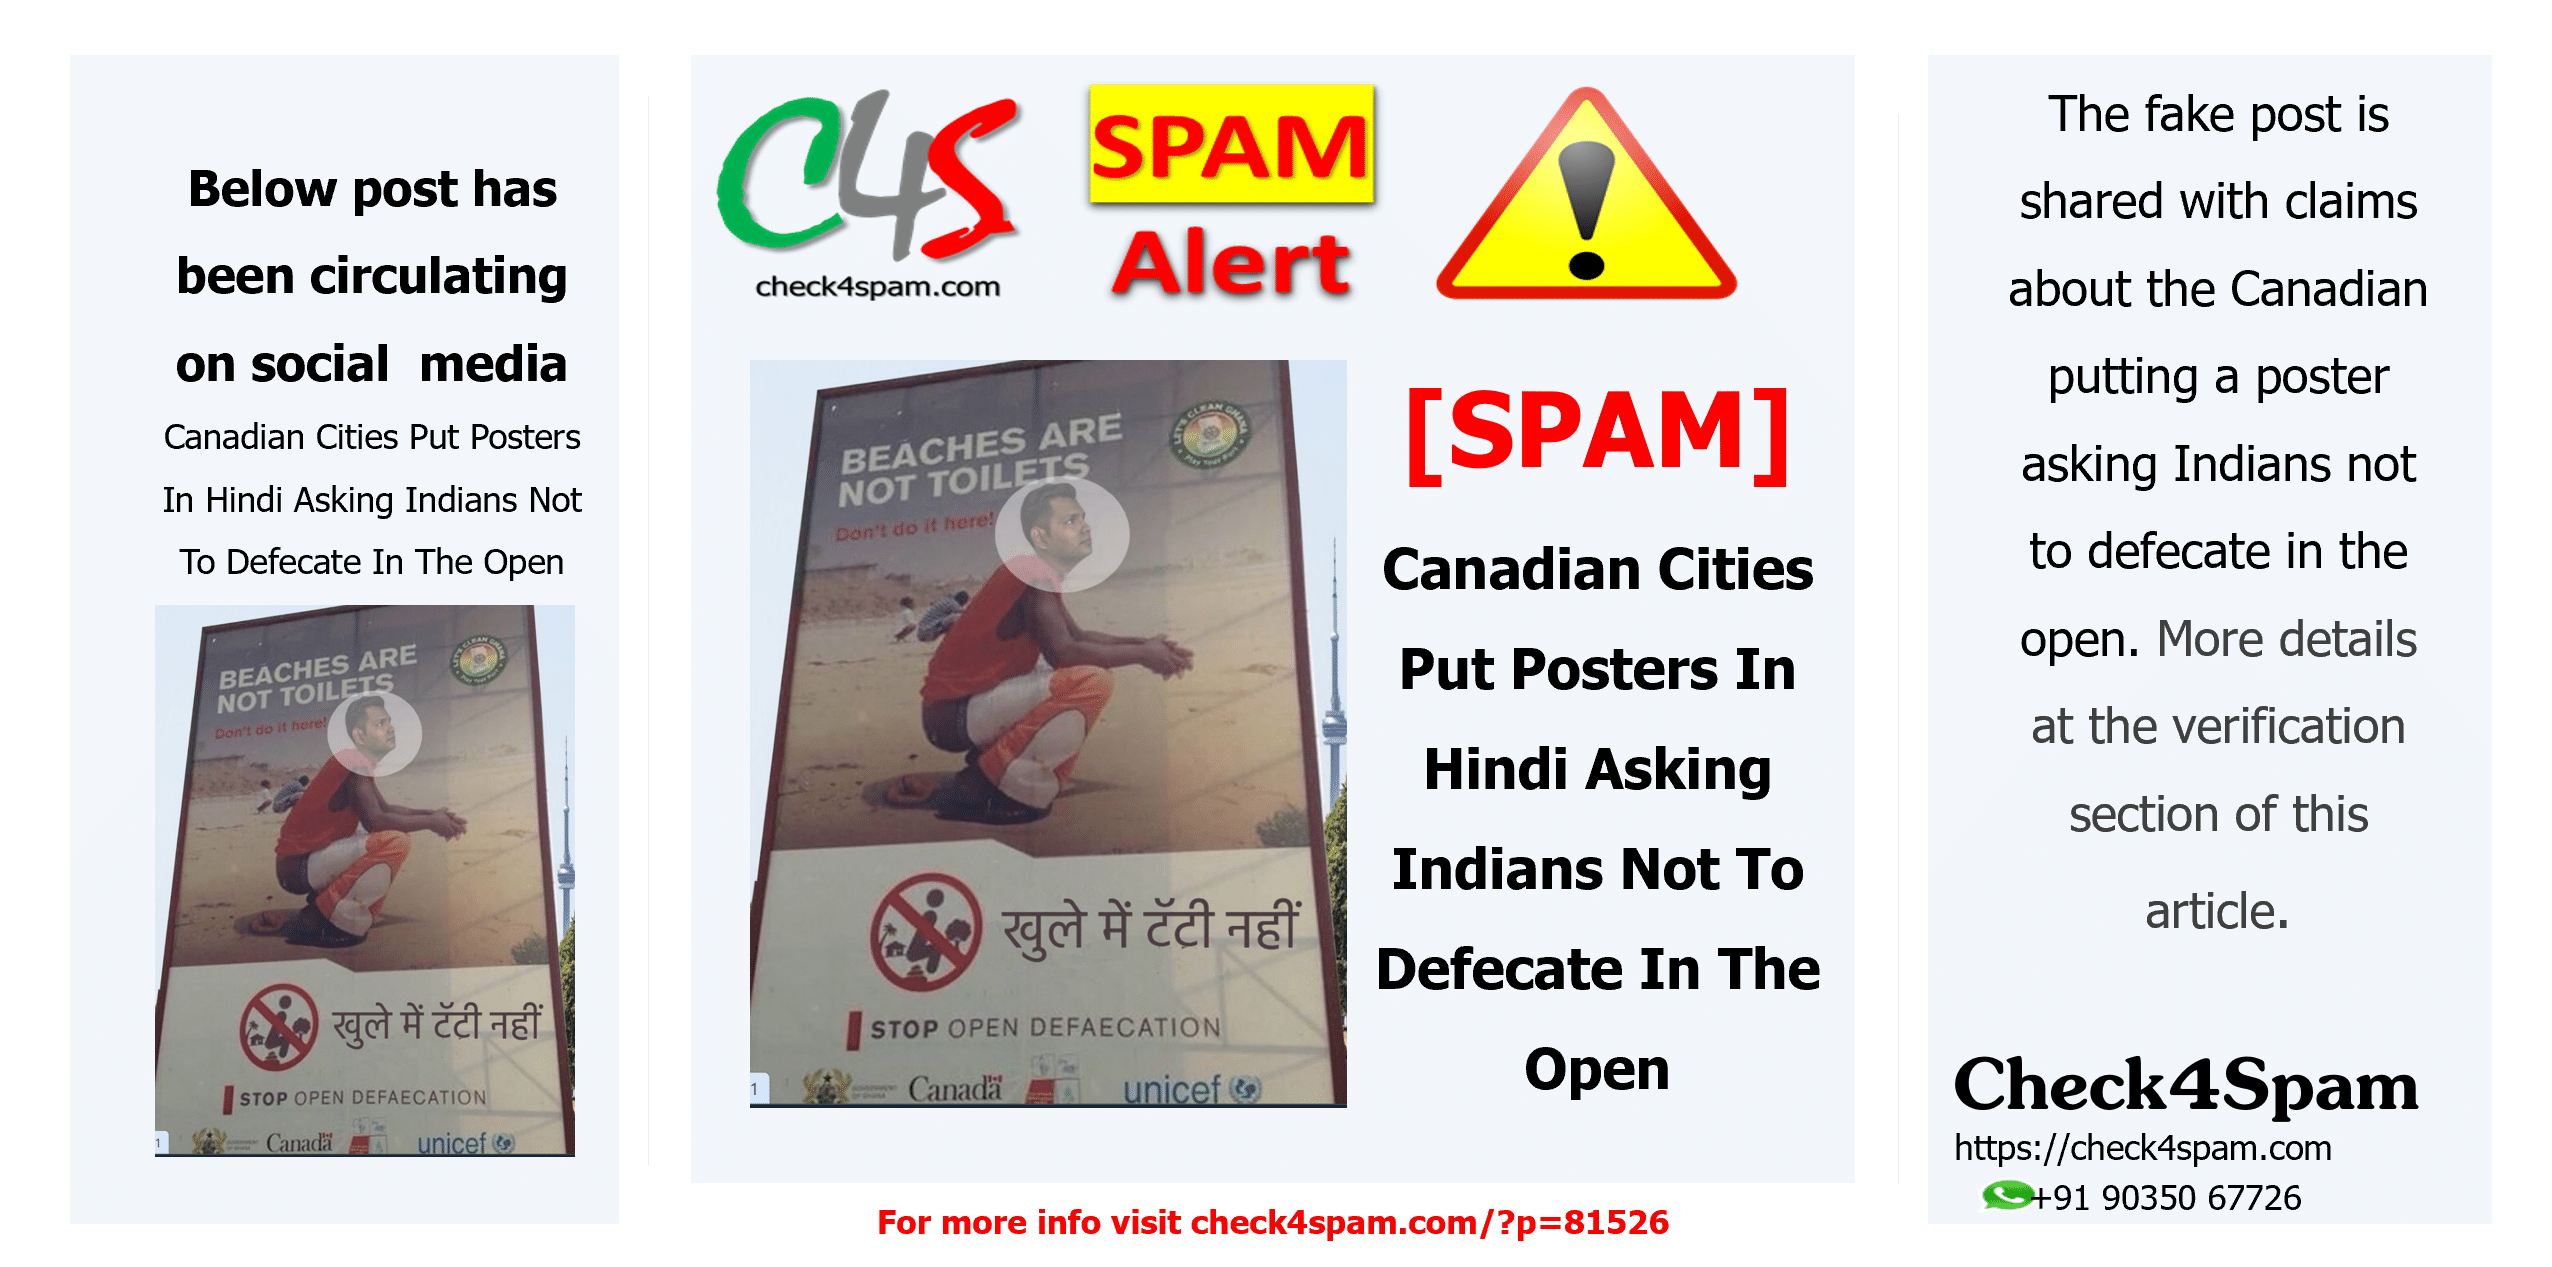 Canadian Cities Put Posters In Hindi Asking Indians Not To Defecate In The Open